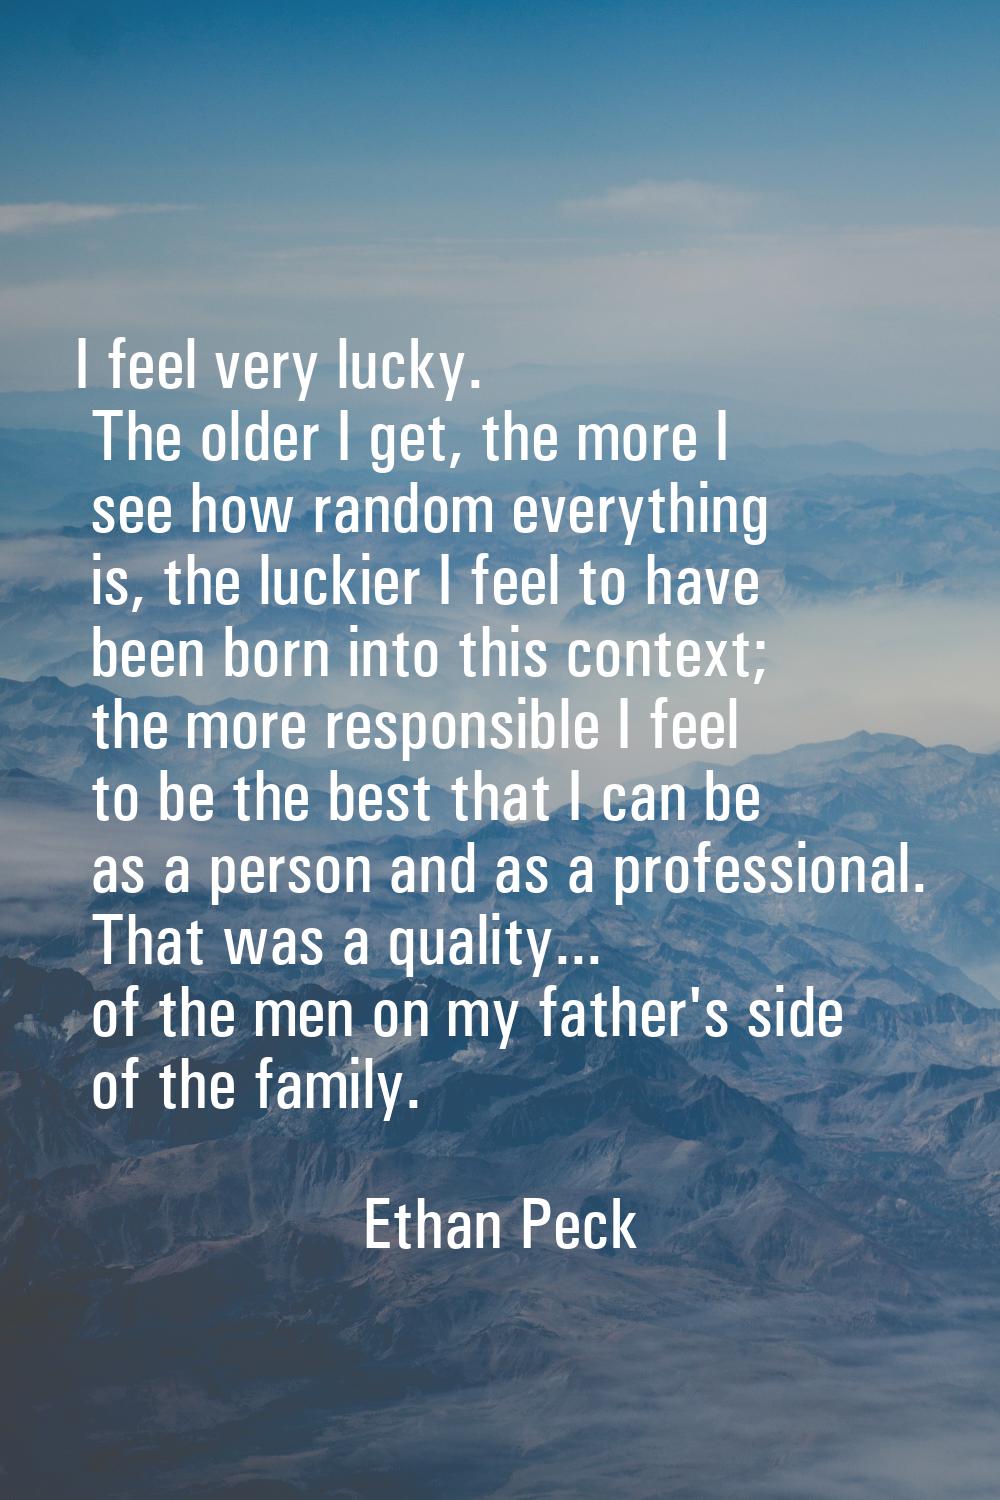 I feel very lucky. The older I get, the more I see how random everything is, the luckier I feel to 